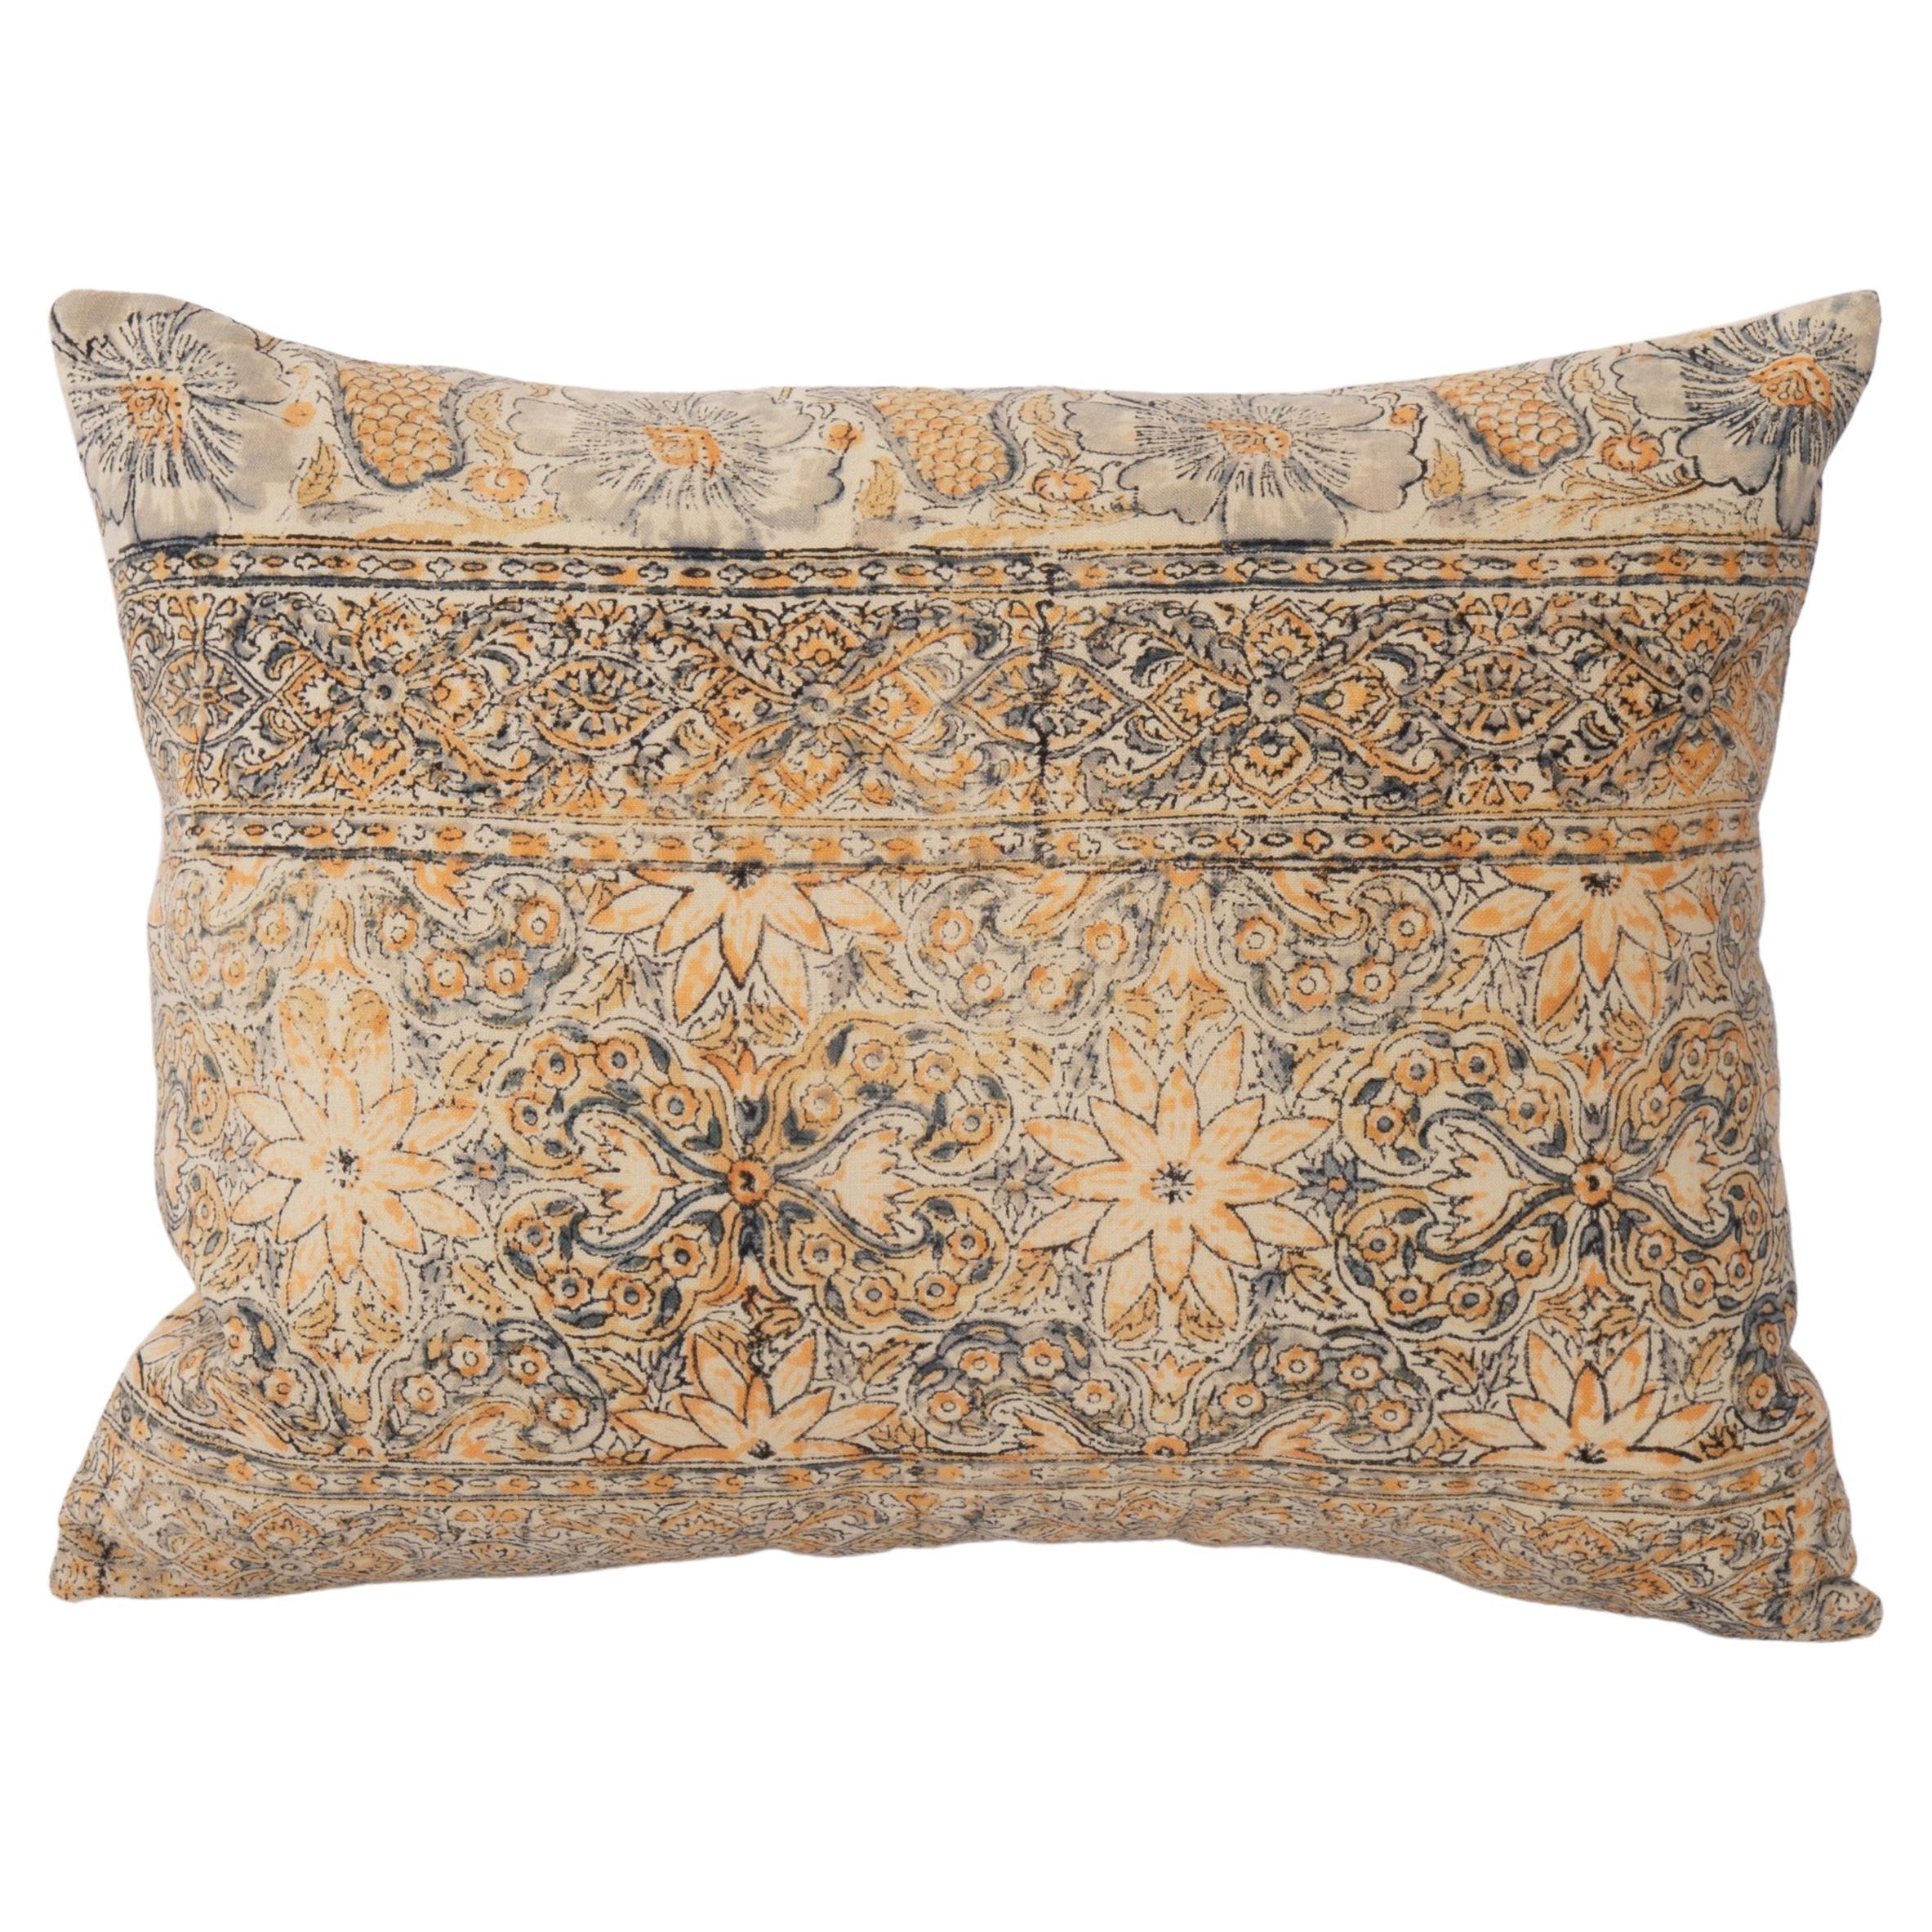 Pillow Cover made from a Vintage Indian Block Printed Textile